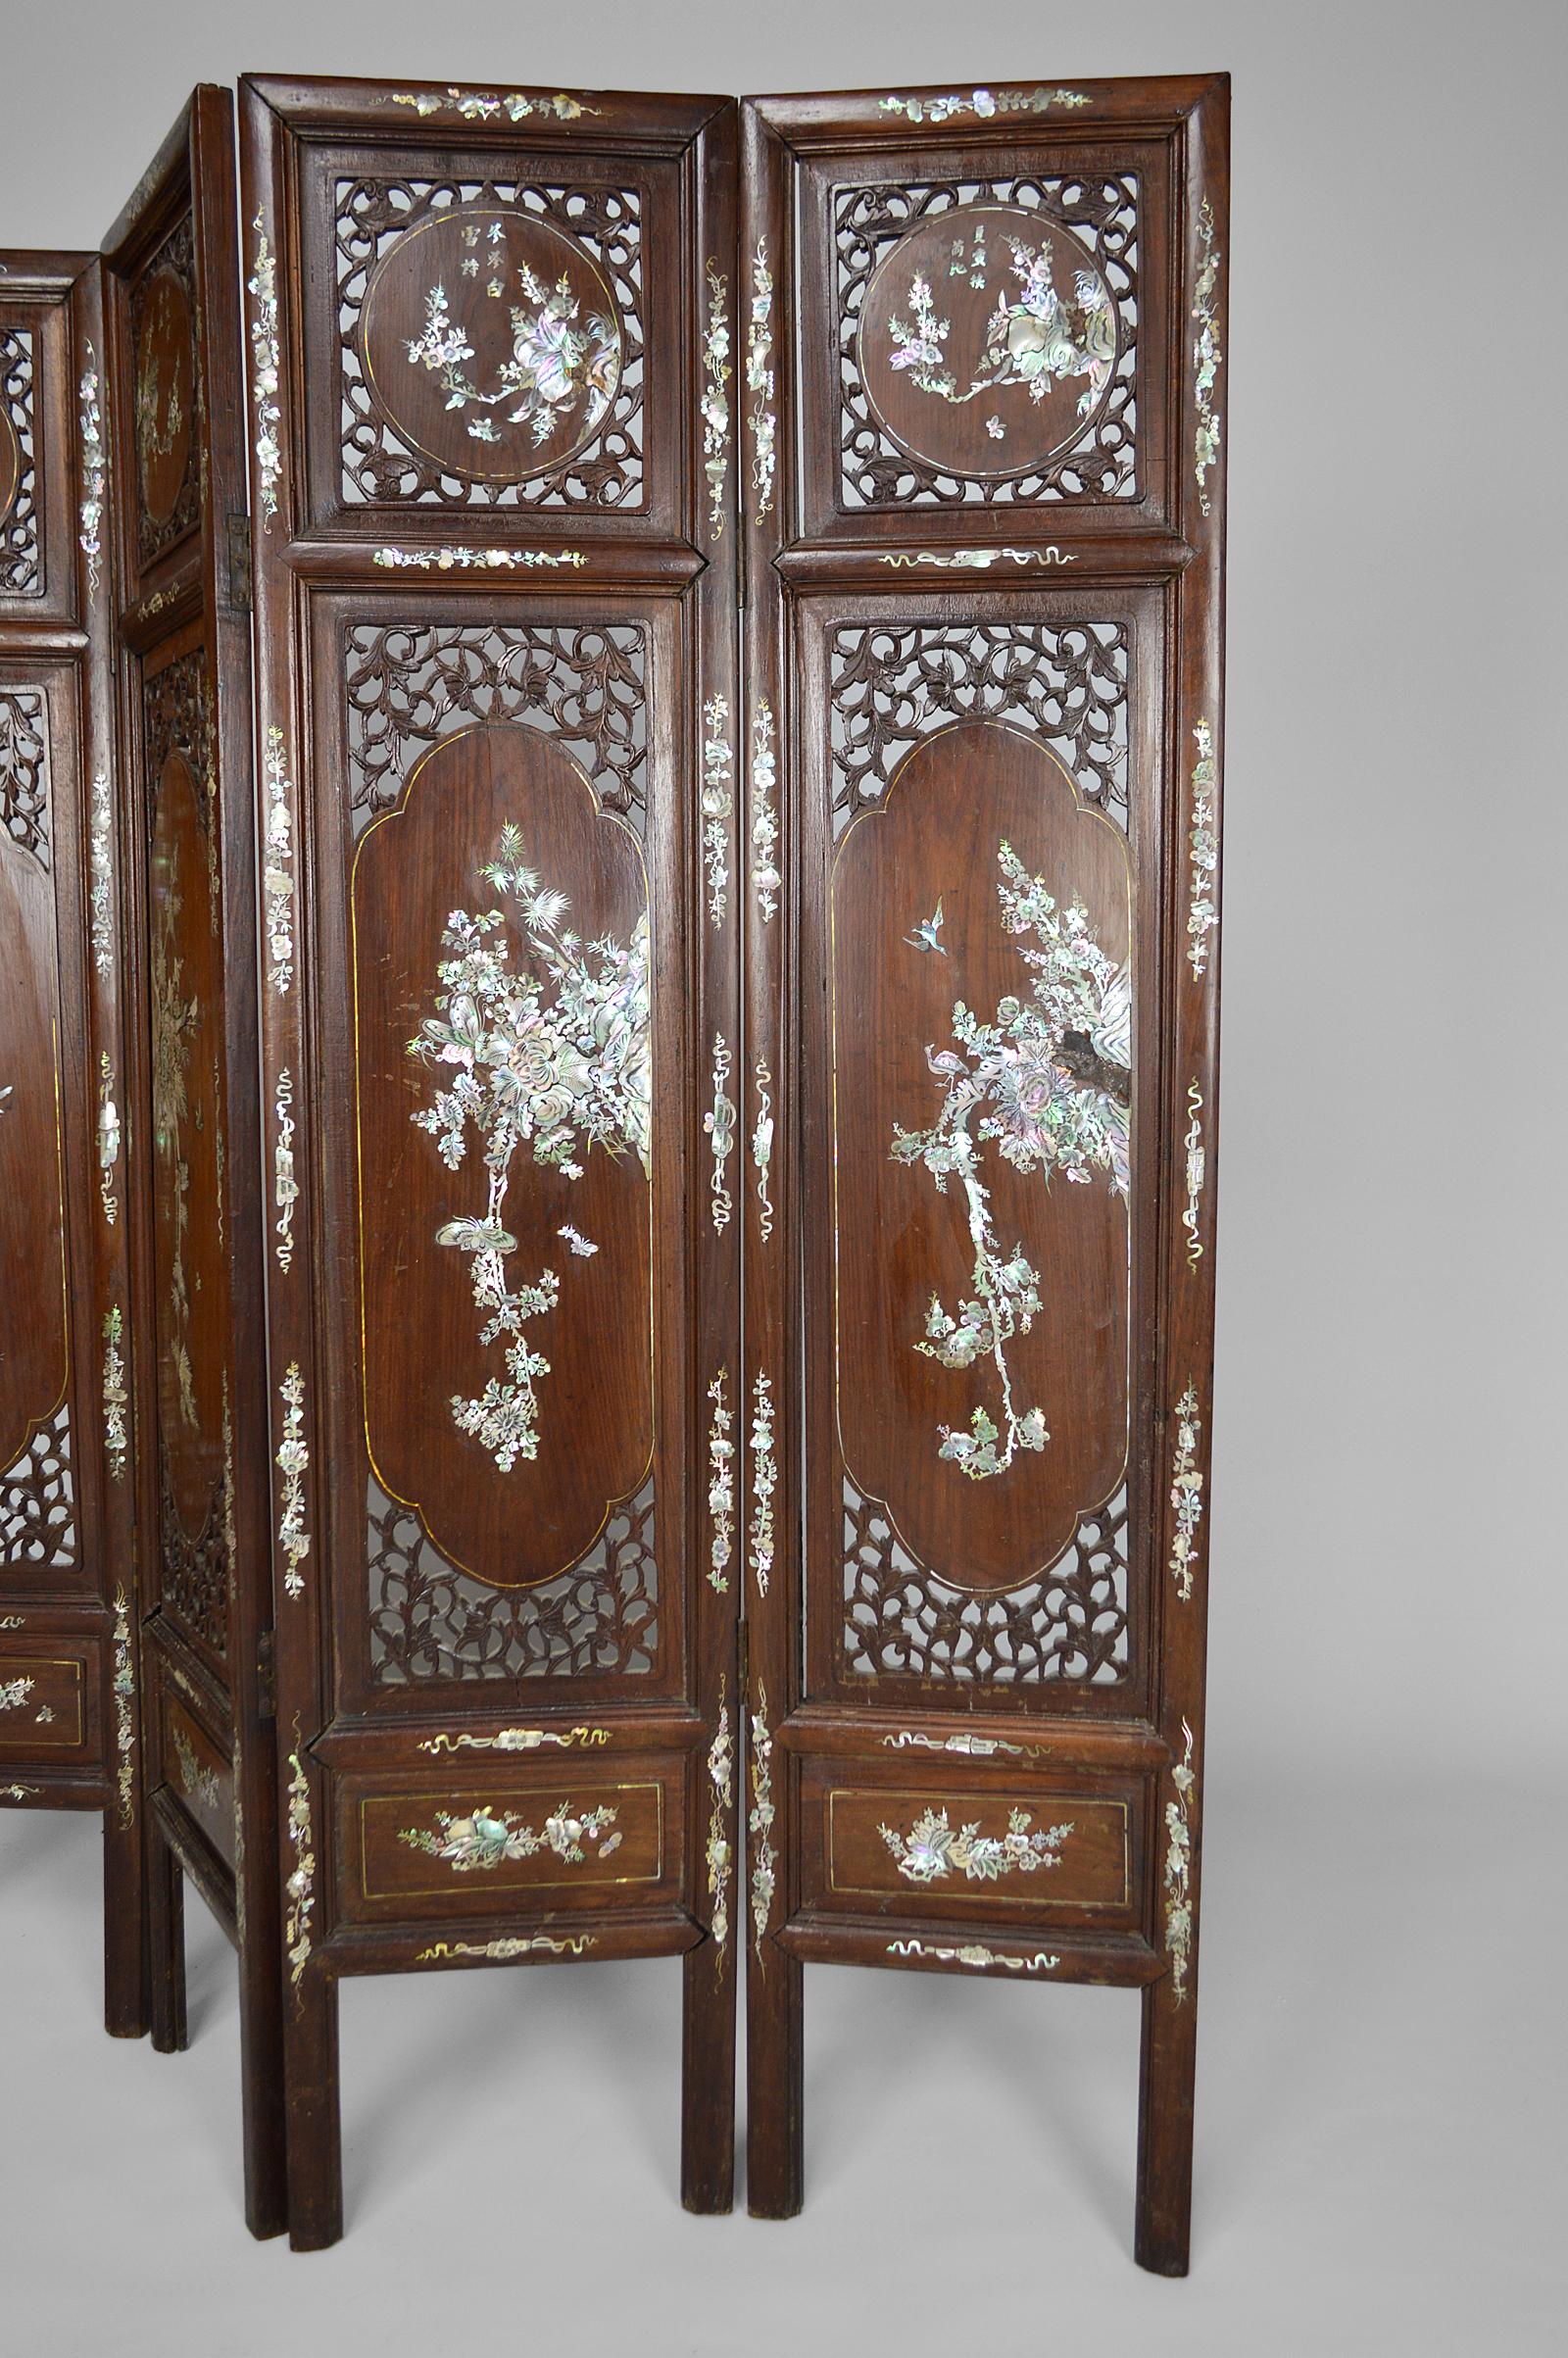 Chinese Asian Folding Screen in Carved Wood and Mother-of-Pearl, 19th Century